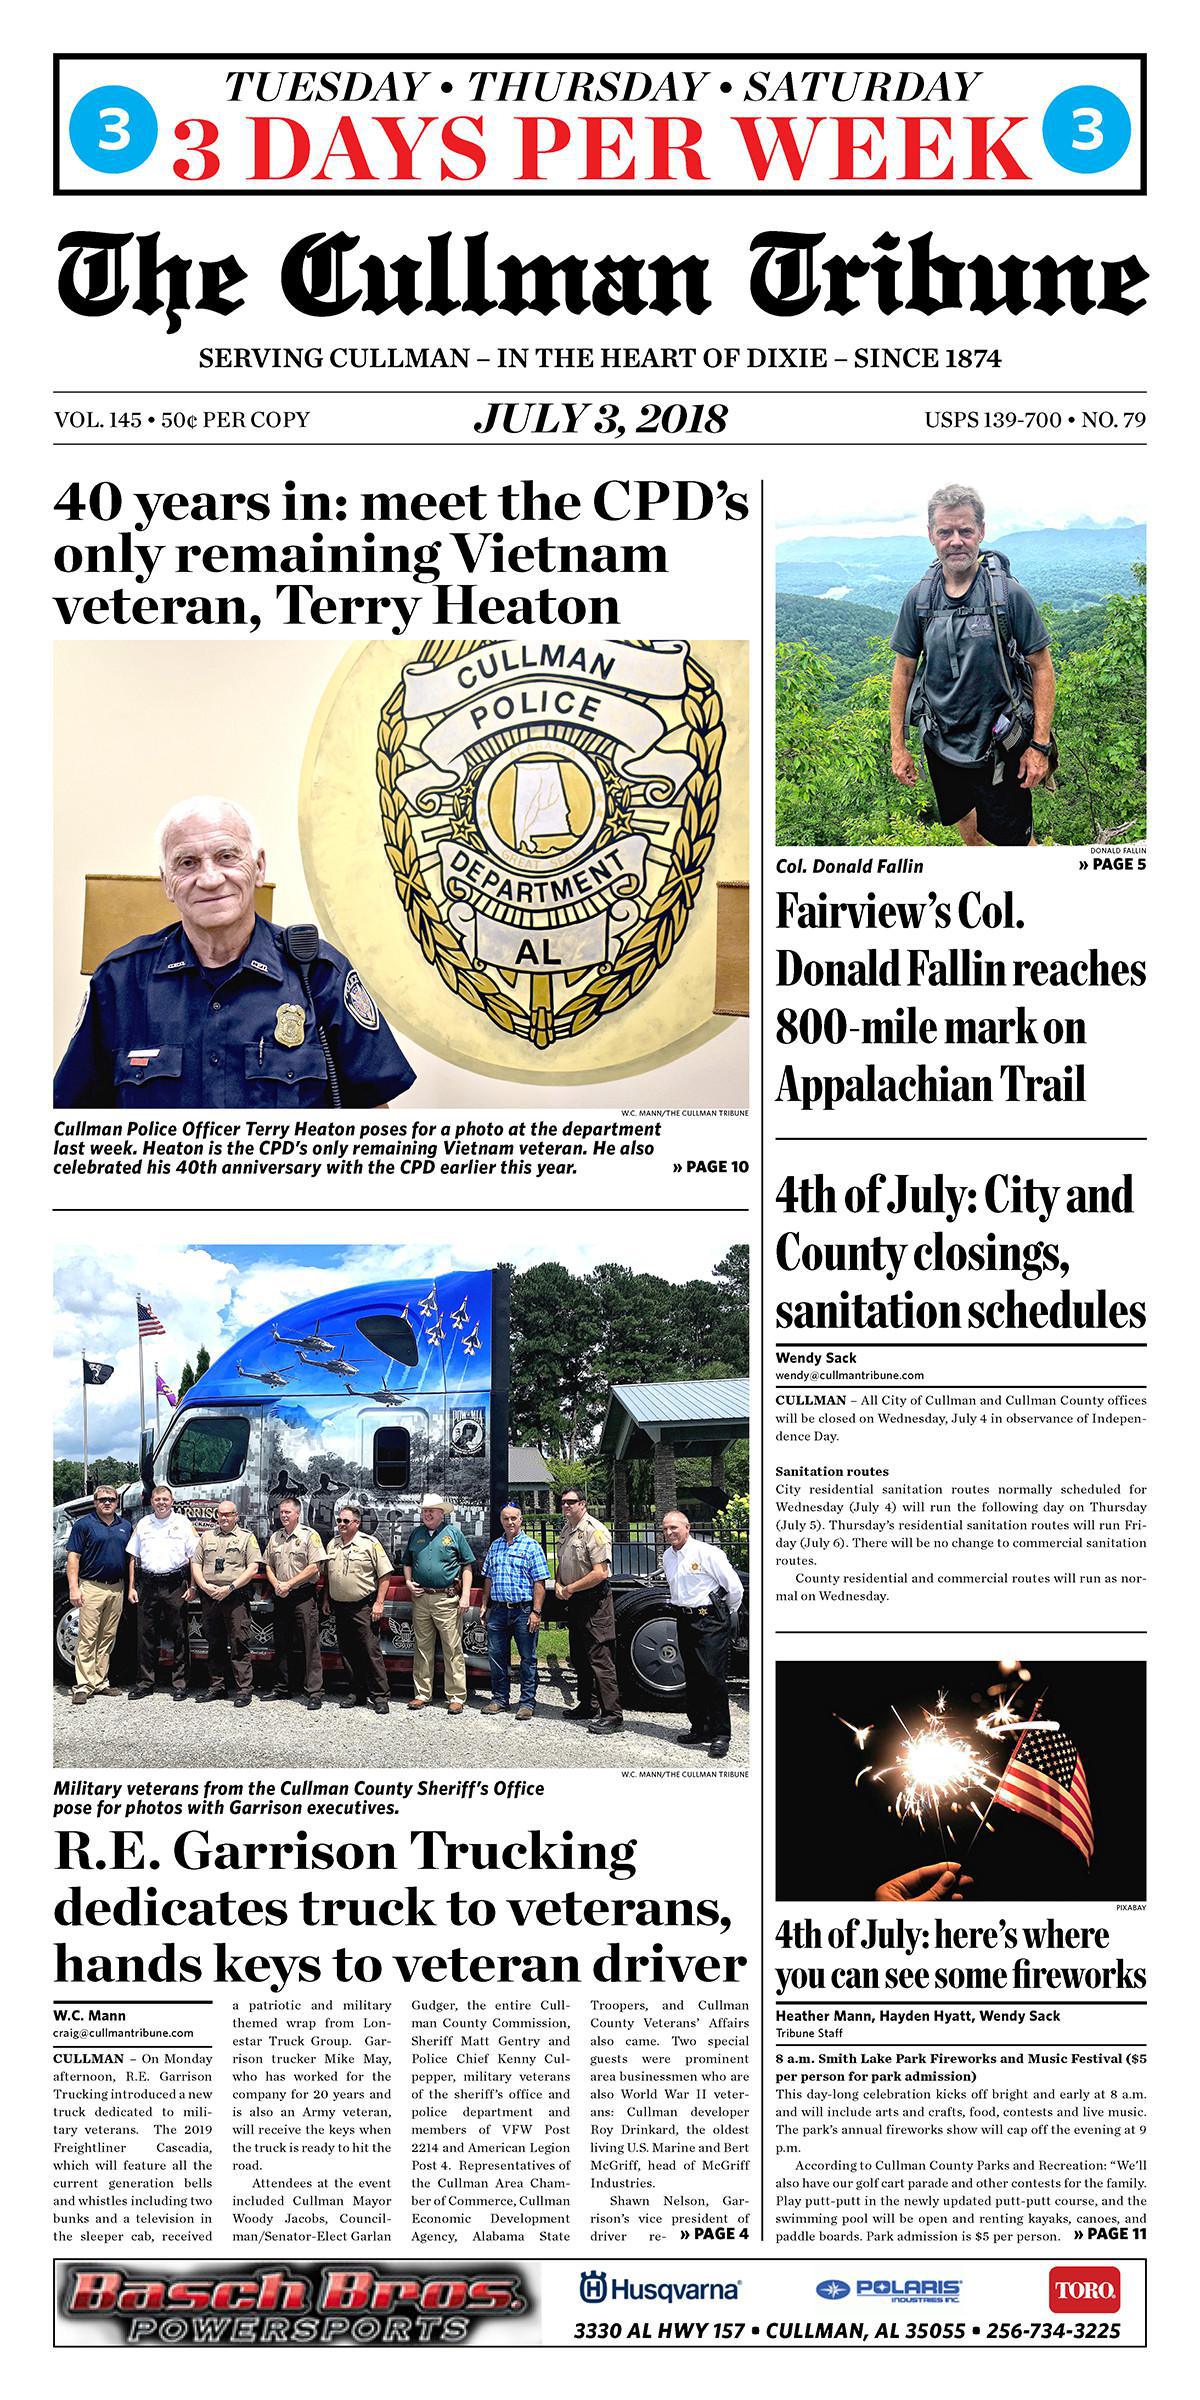 Good Morning Cullman! The 07-03-2018 edition of the Cullman Tribune is now ready to view